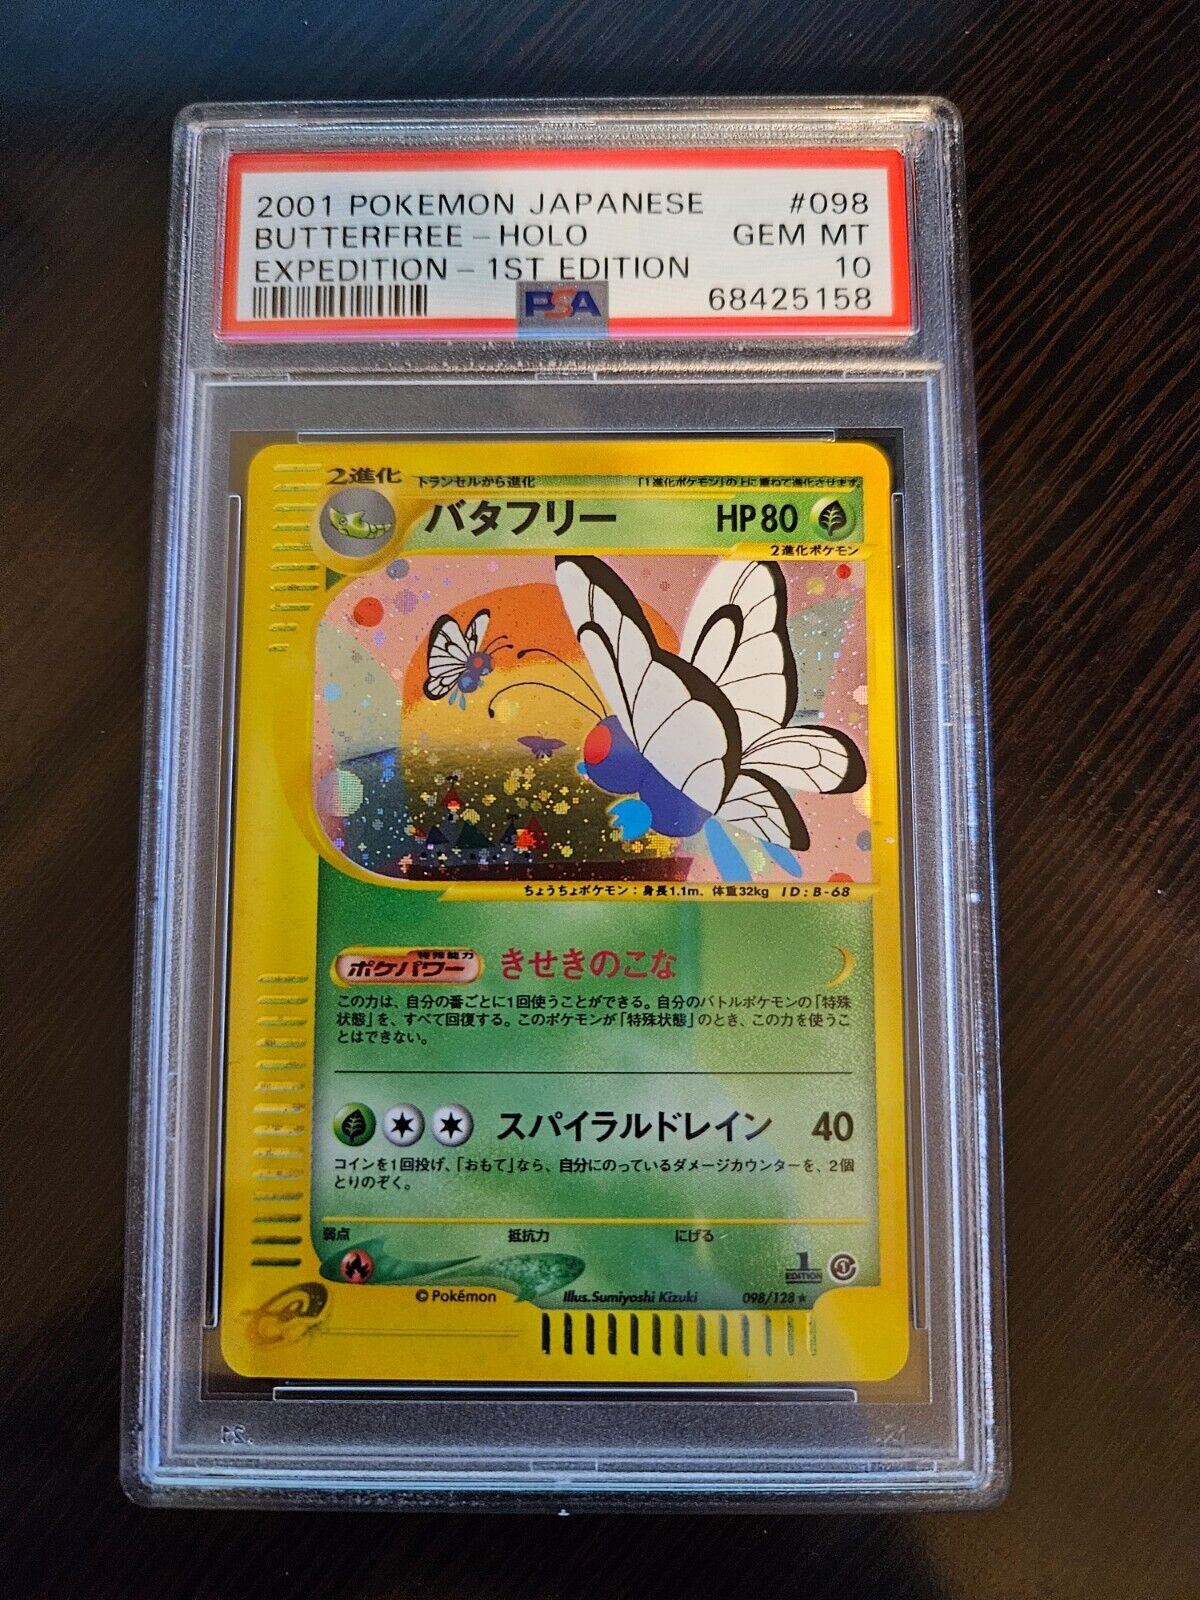 Butterfree PSA 10 Gem Mint Japanese Expedition 1st edition Holo Pokemon Card ***